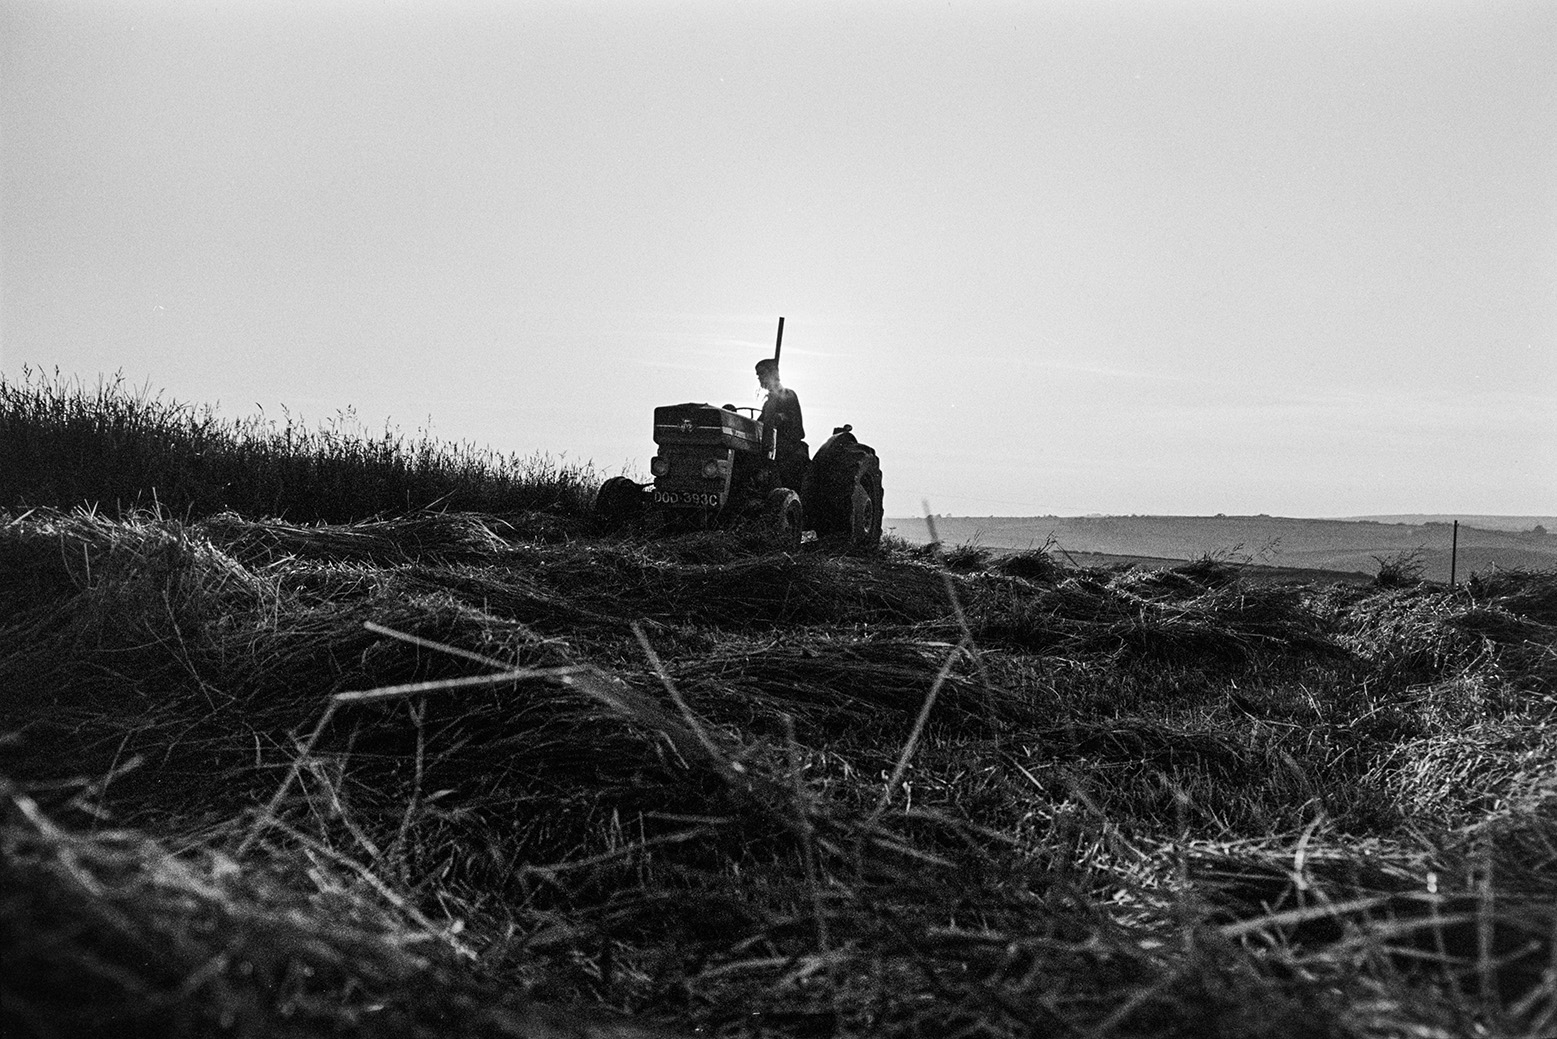 Derek Bright using a tractor and mower to cut hay in a field at Mill Road Farm, Beaford. He is silhouetted against the horizon. The farm was also known as Jeffrys.